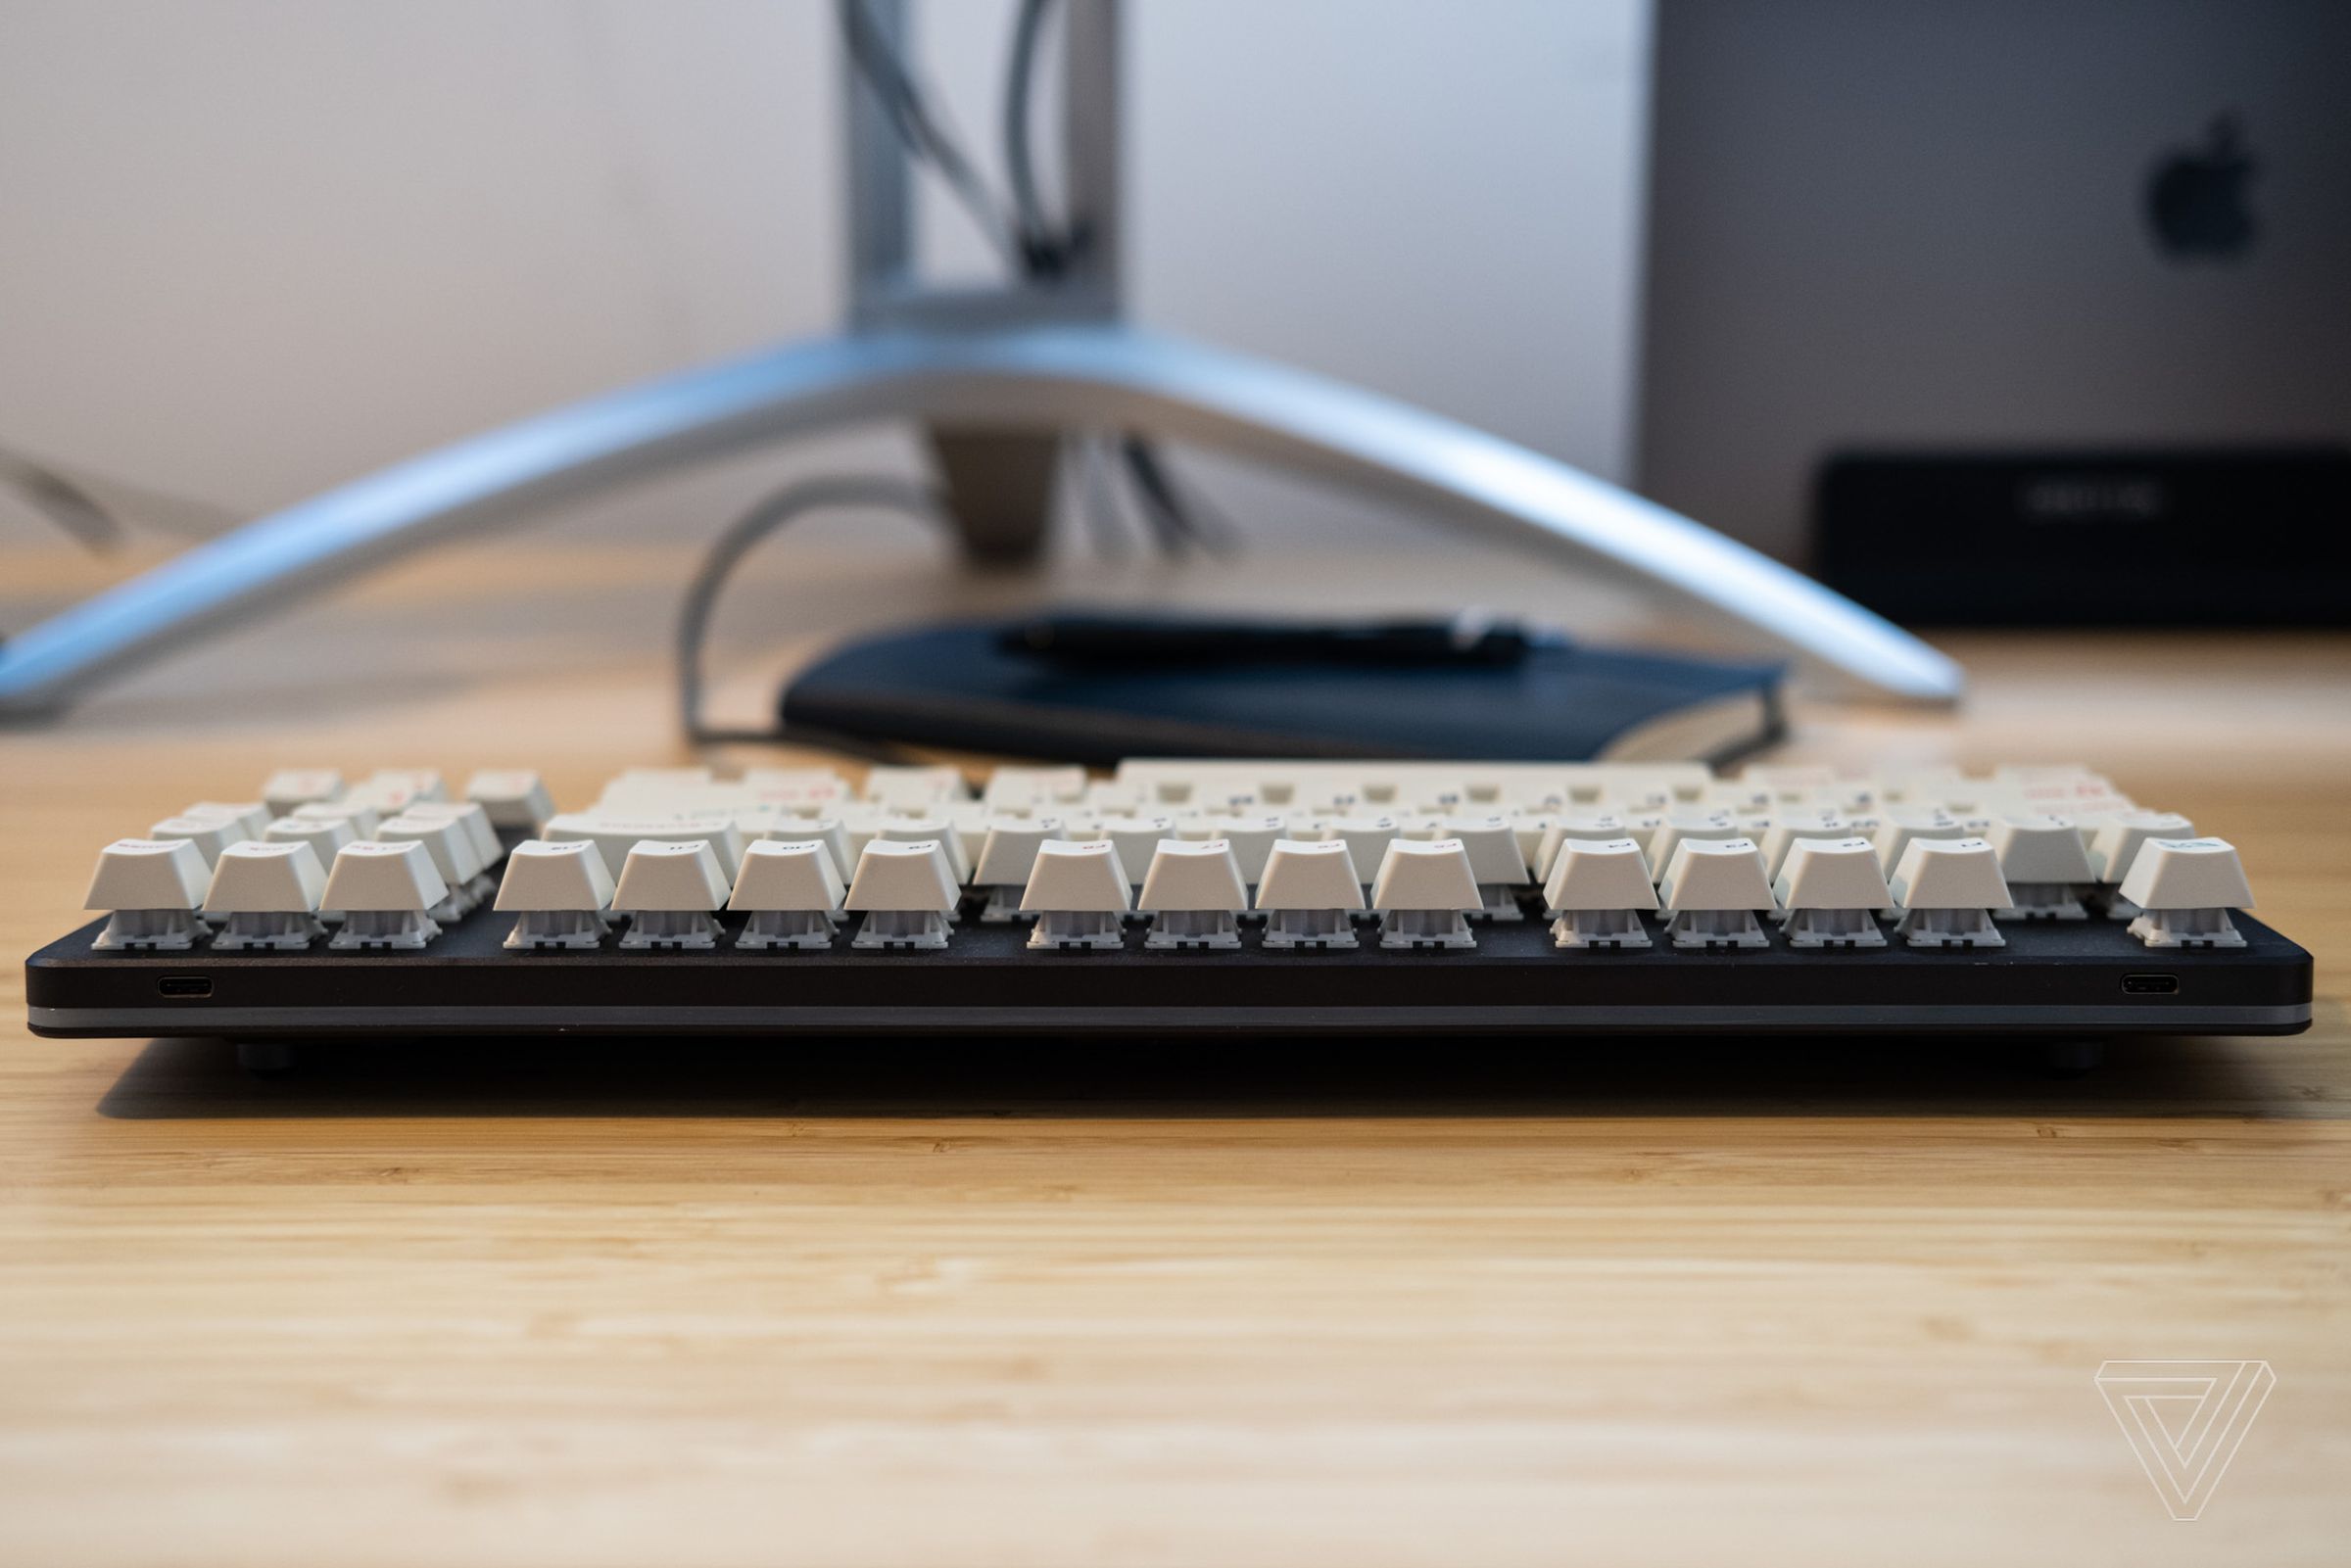 Two USB-C ports can be found on top of the keyboard.